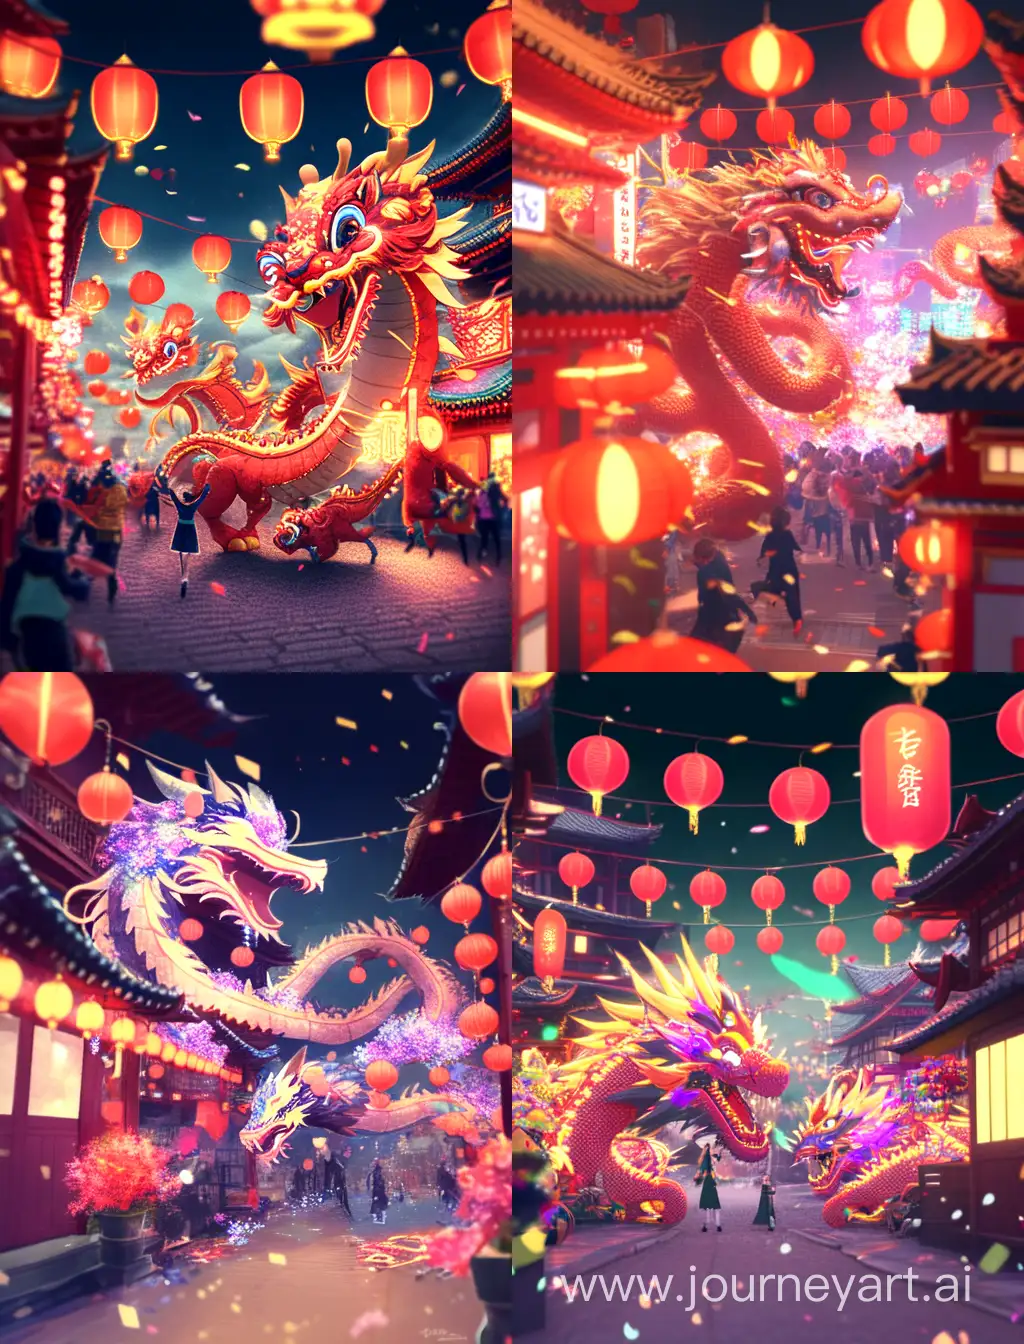 Chinese lively dragon dance scene, streets, lanterns, fireworks, resolution ，cinematic shot, HQ image, 957＊1287